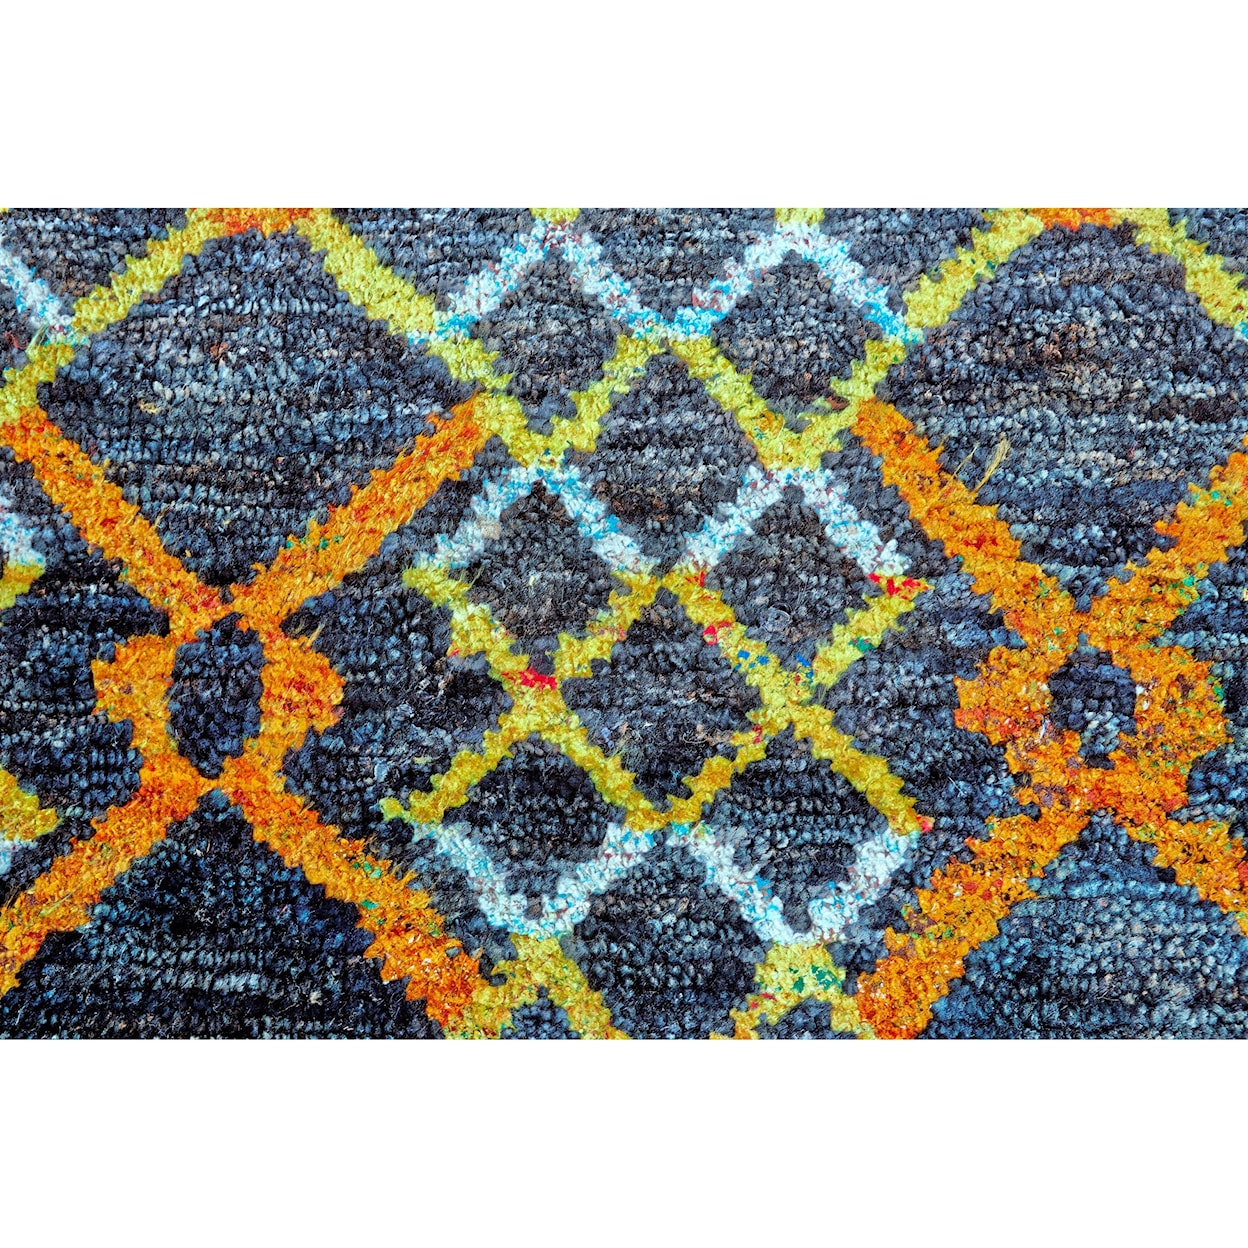 Feizy Rugs Tortola Amber 5'-6" x 8'-6" Area Rug